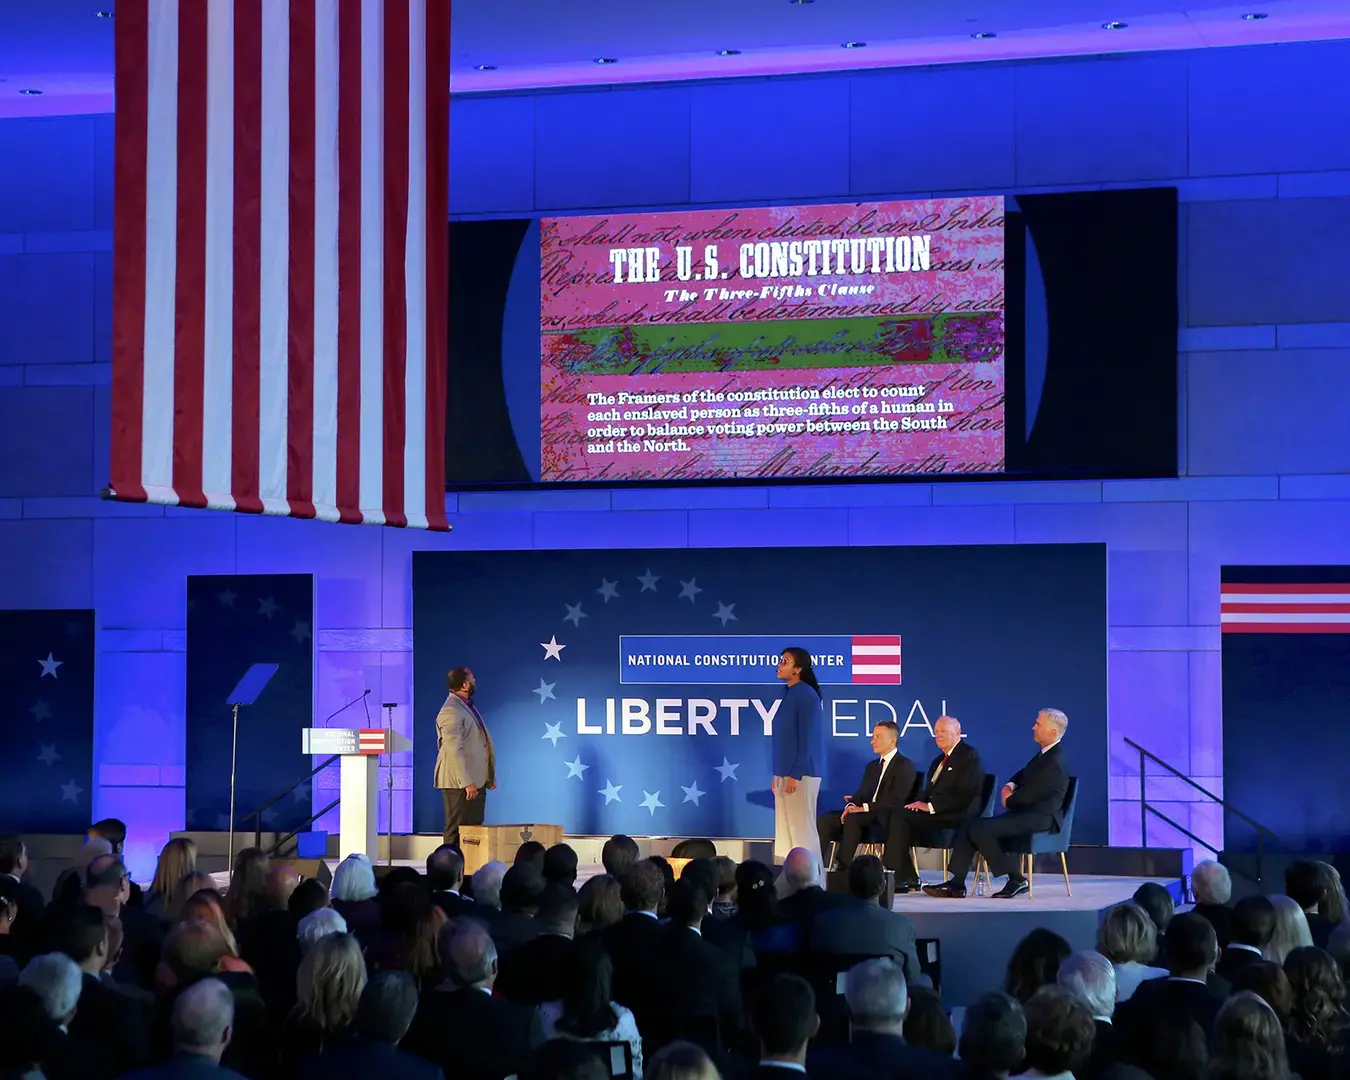 Fourteen performed at the Liberty Medal honoring Justice Anthony Kennedy, 2019, Grand Hall Overlook at the National Constitution Center, Philadelphia, PA. Photo by Peter Van Beever.